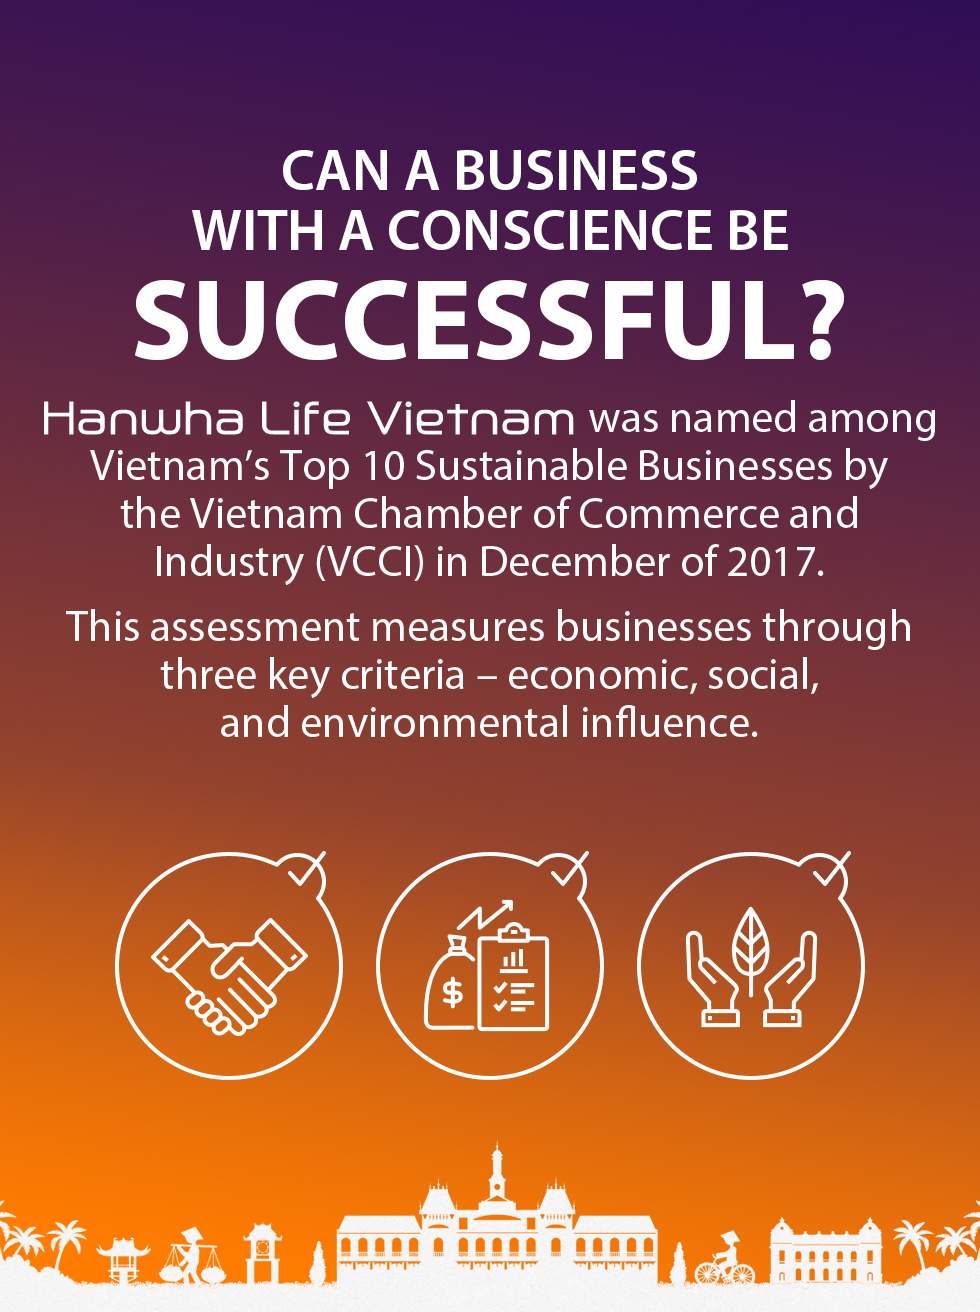 Can a business with a conscience be successful? Hanwha Life Vietnam was named among Vietnam's Top 10 Sustainable Businesses by the Vietnam Chamber of Commerce and Industry (VCCI) in December of 2017. This assessment measures businesses through three key criteria – economic, social, and environmental influence.